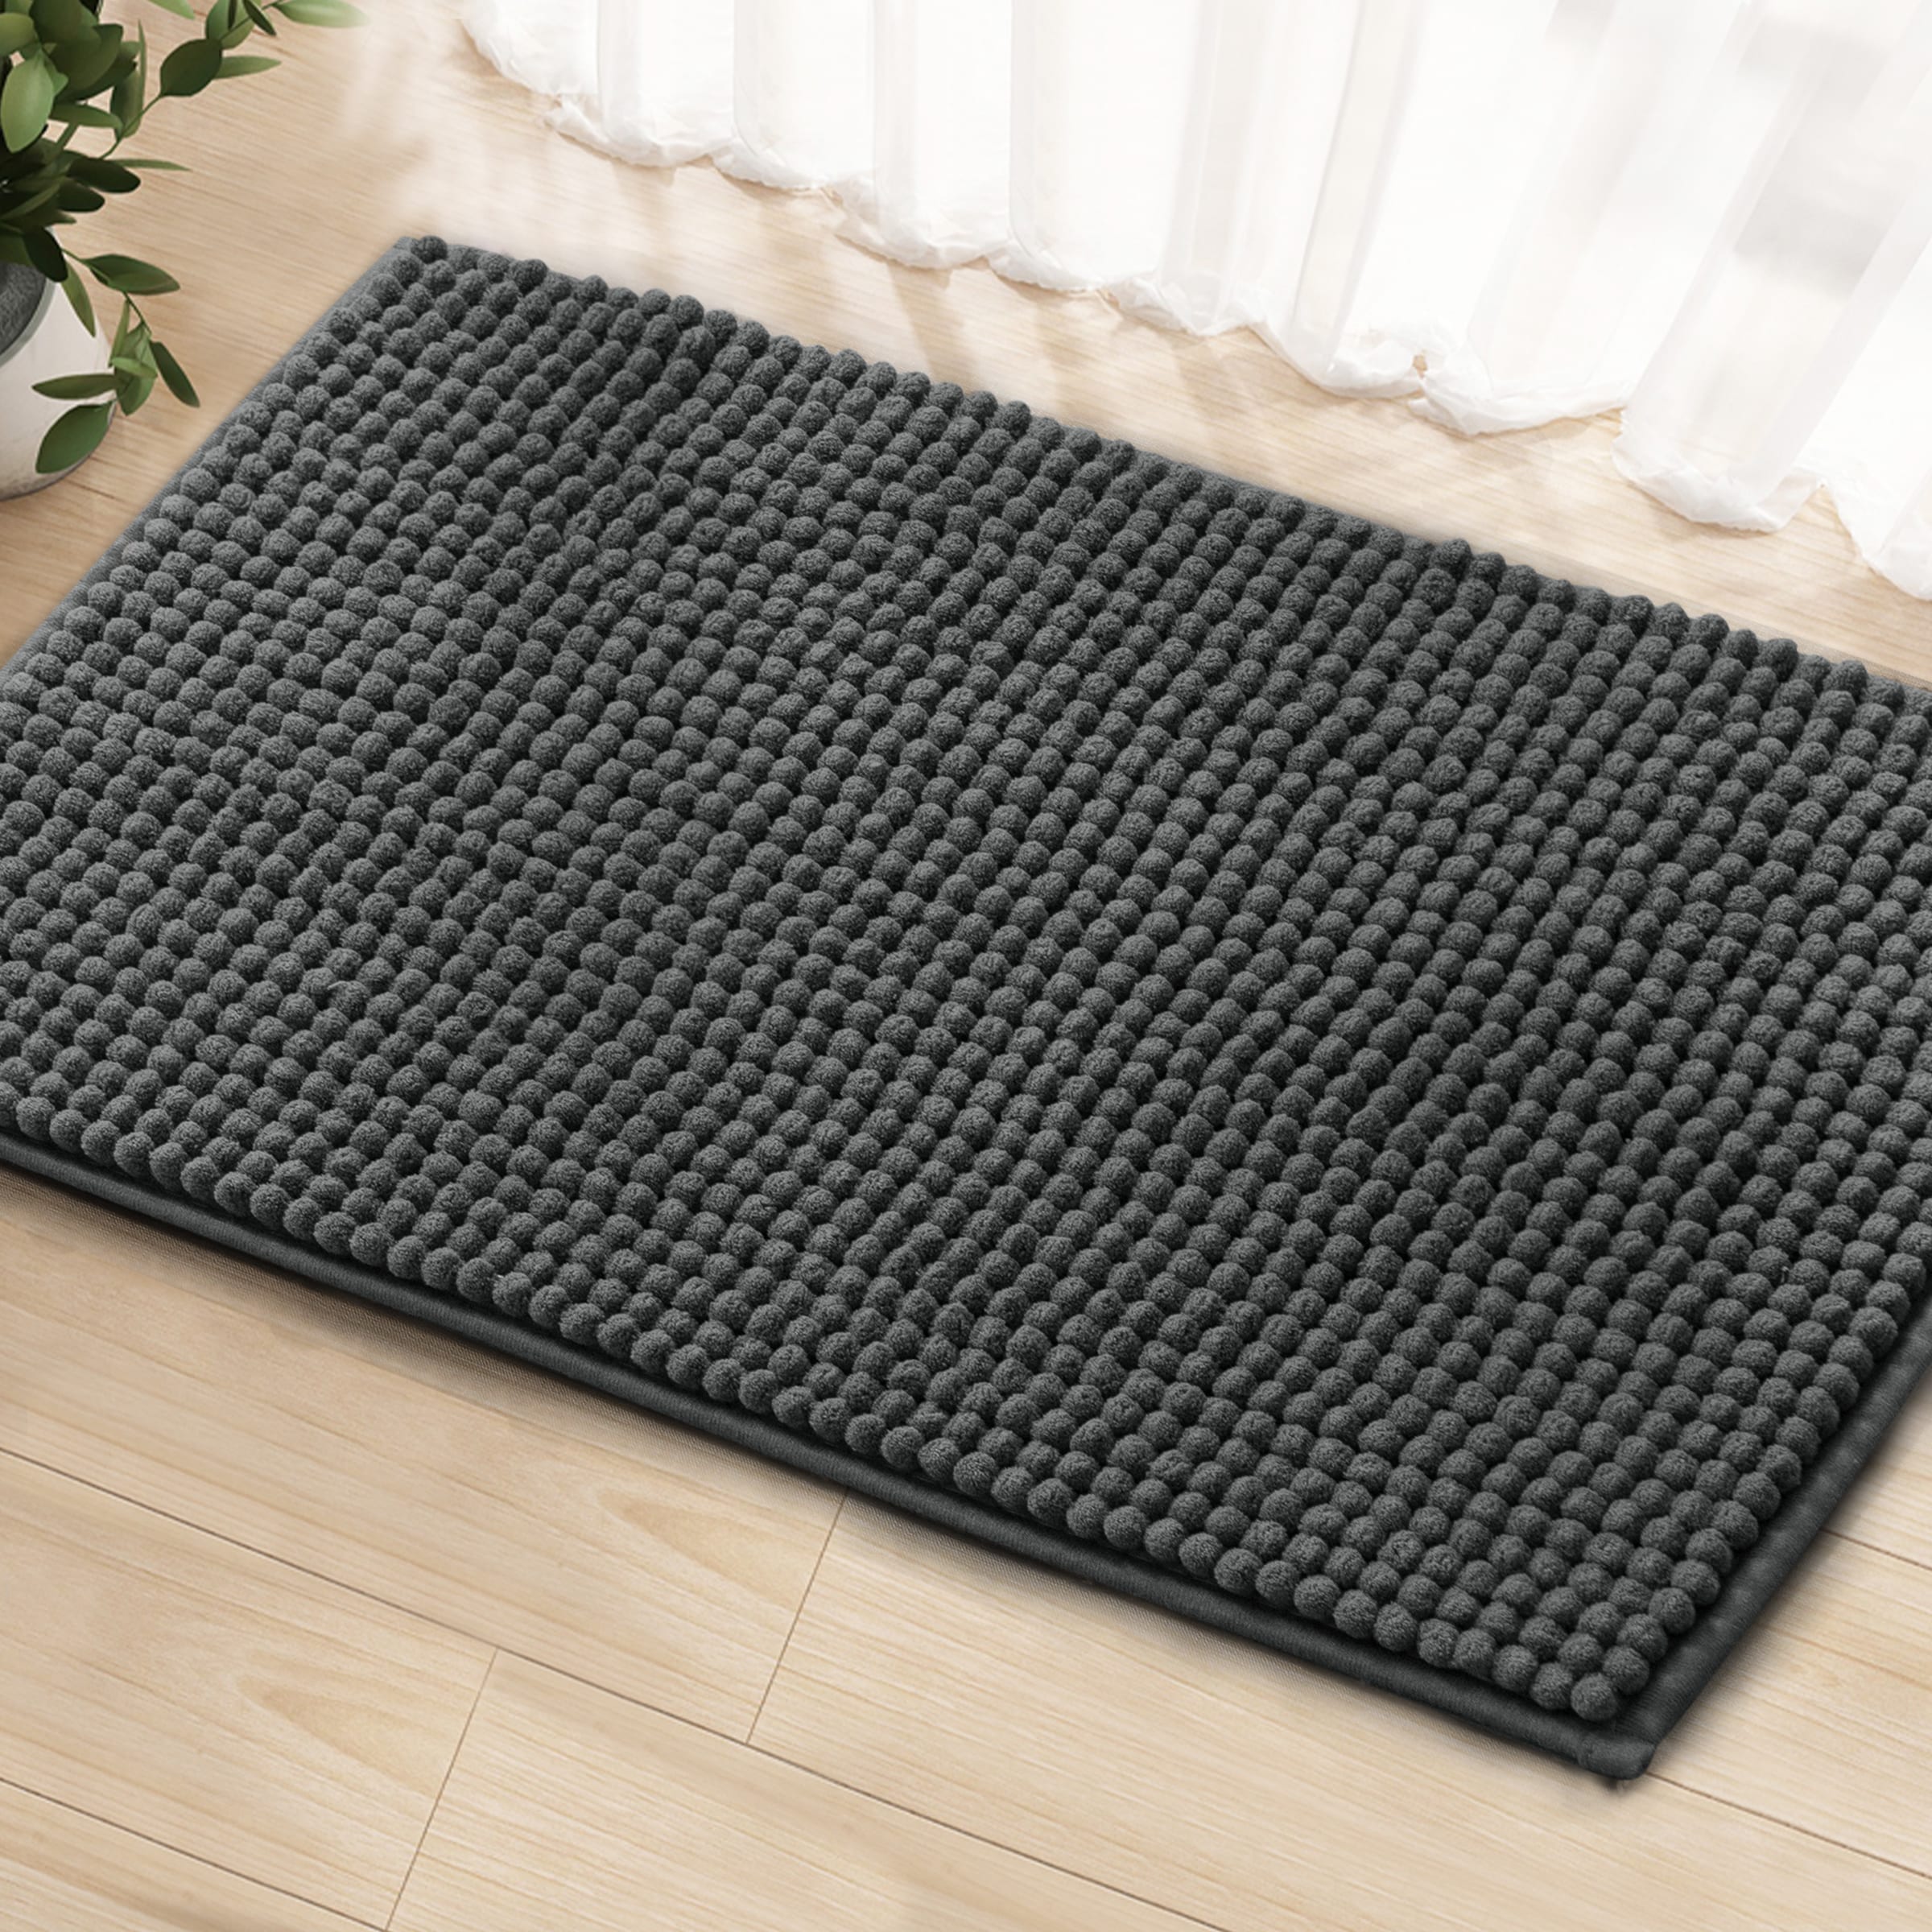 Microf Toilet Mat Details about   Bathroom Rugs Luxury Chenille Mat Set Soft Plush Shower Rug 